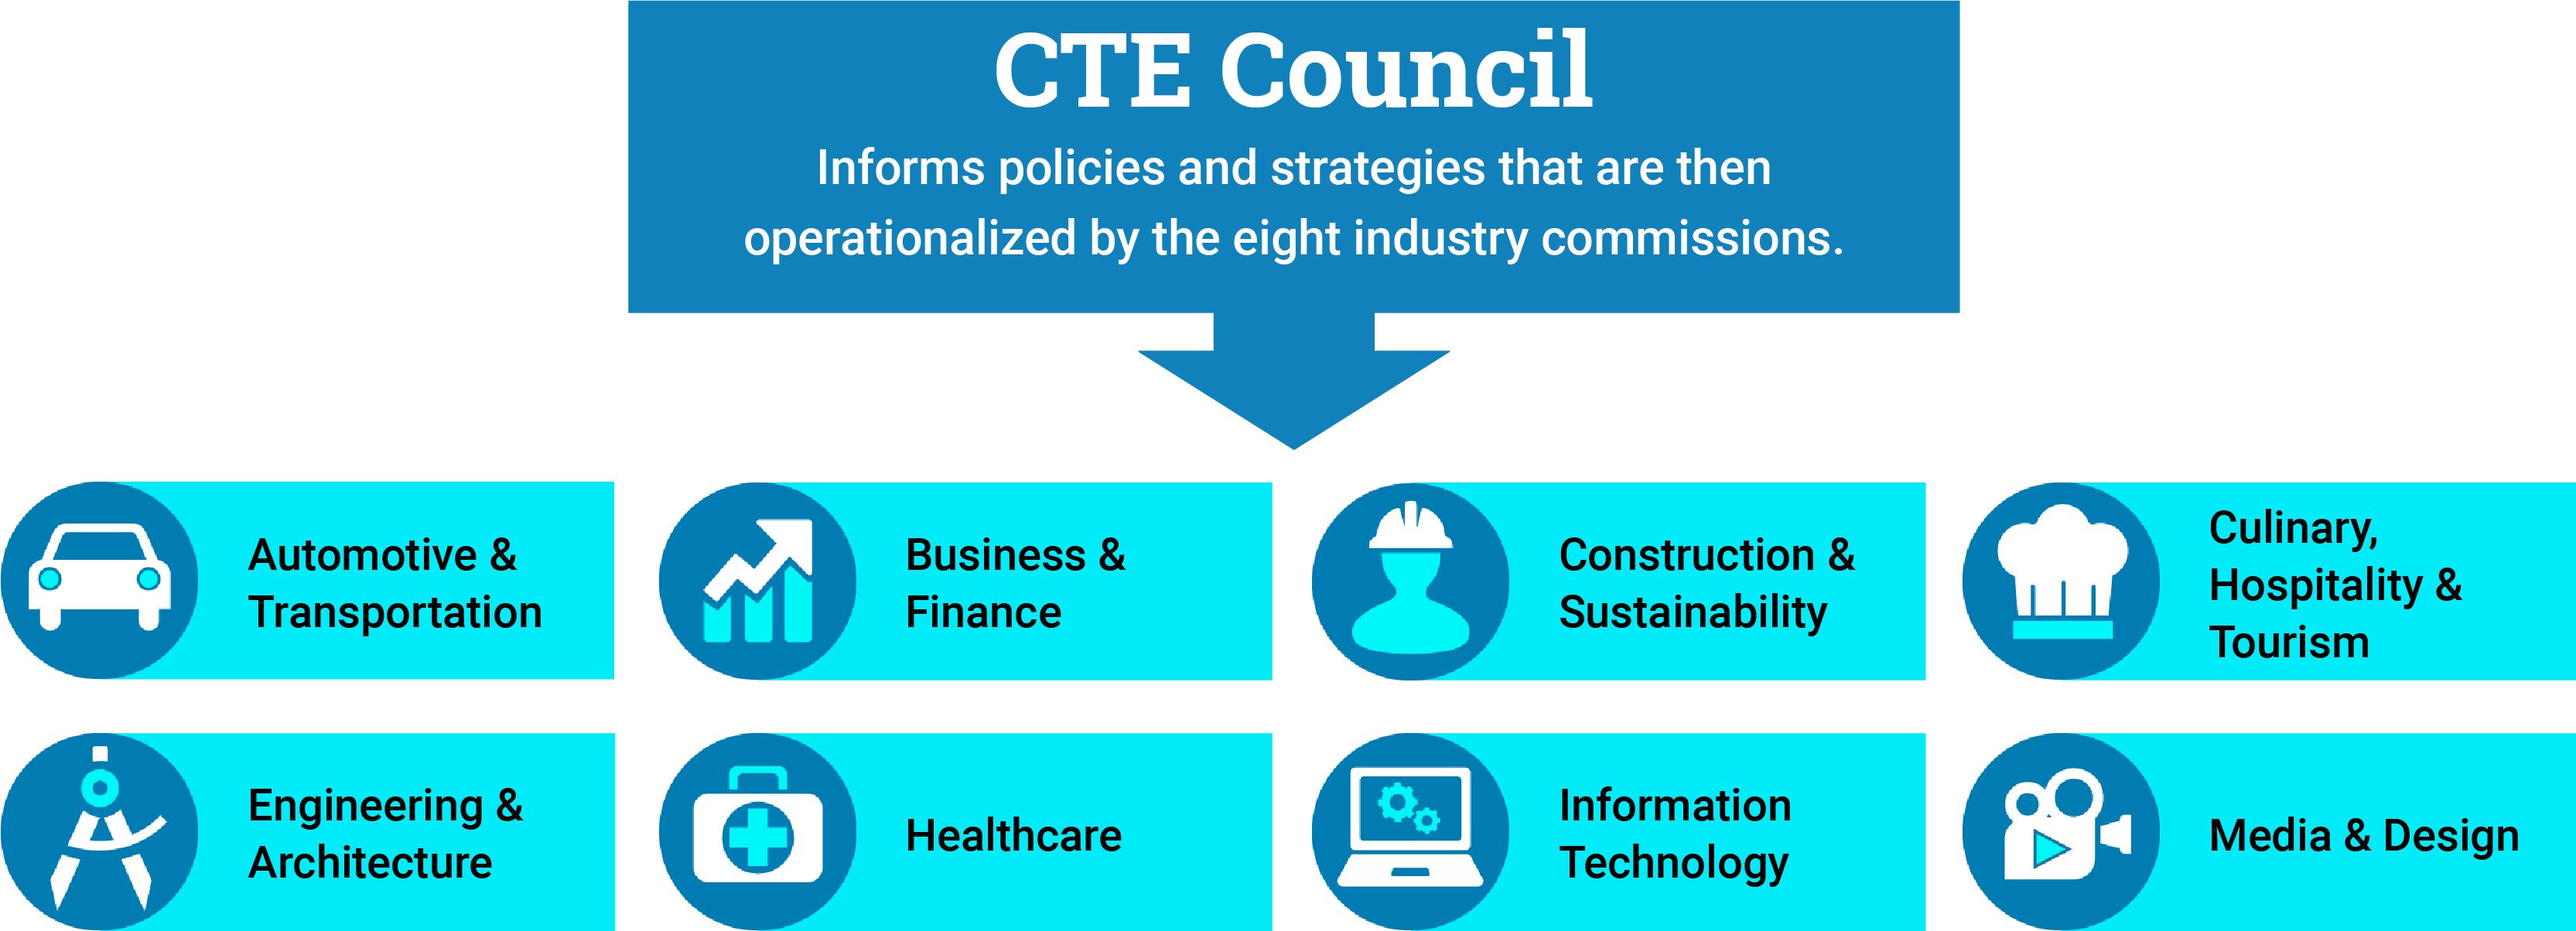 CTE Council informs the policies and strategies that are then operationalized by the 8 industry commissions.